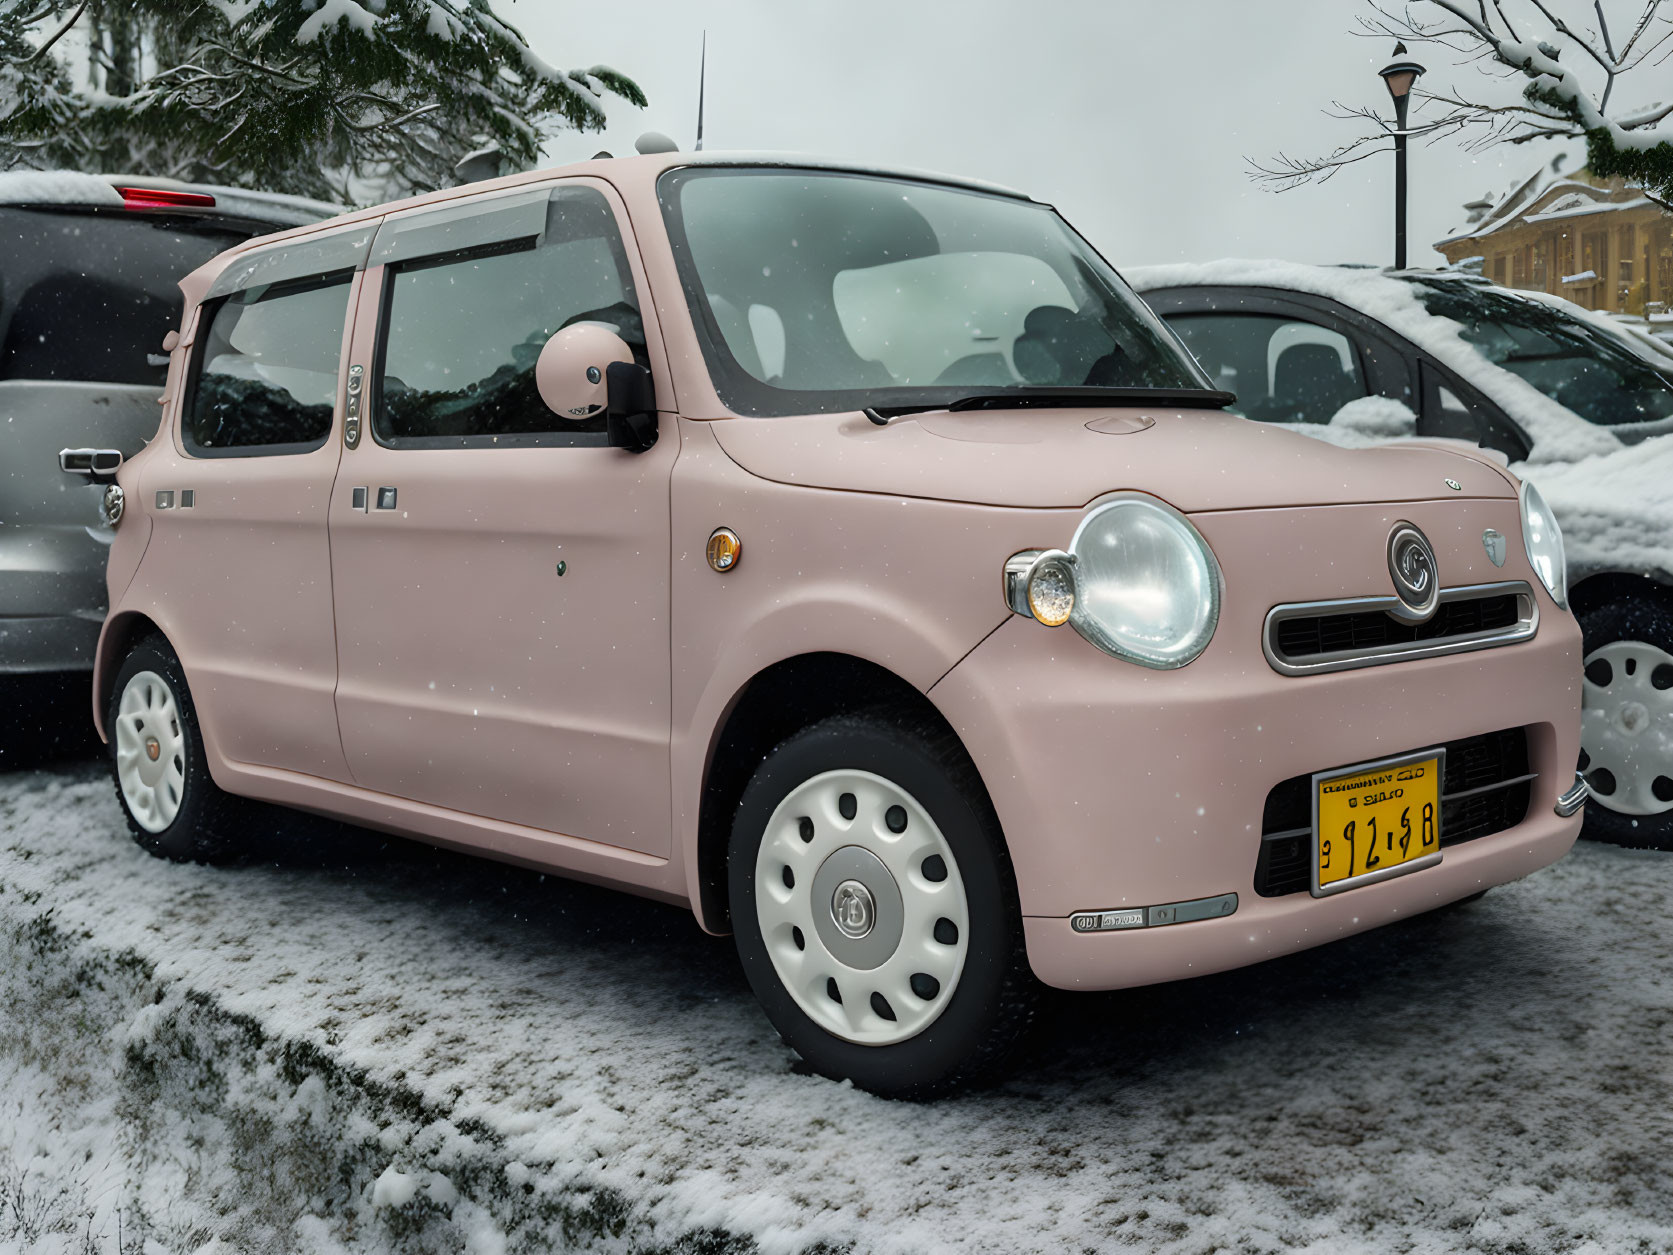 Pink compact car with unique design parked on snowy road, snowflakes visible.